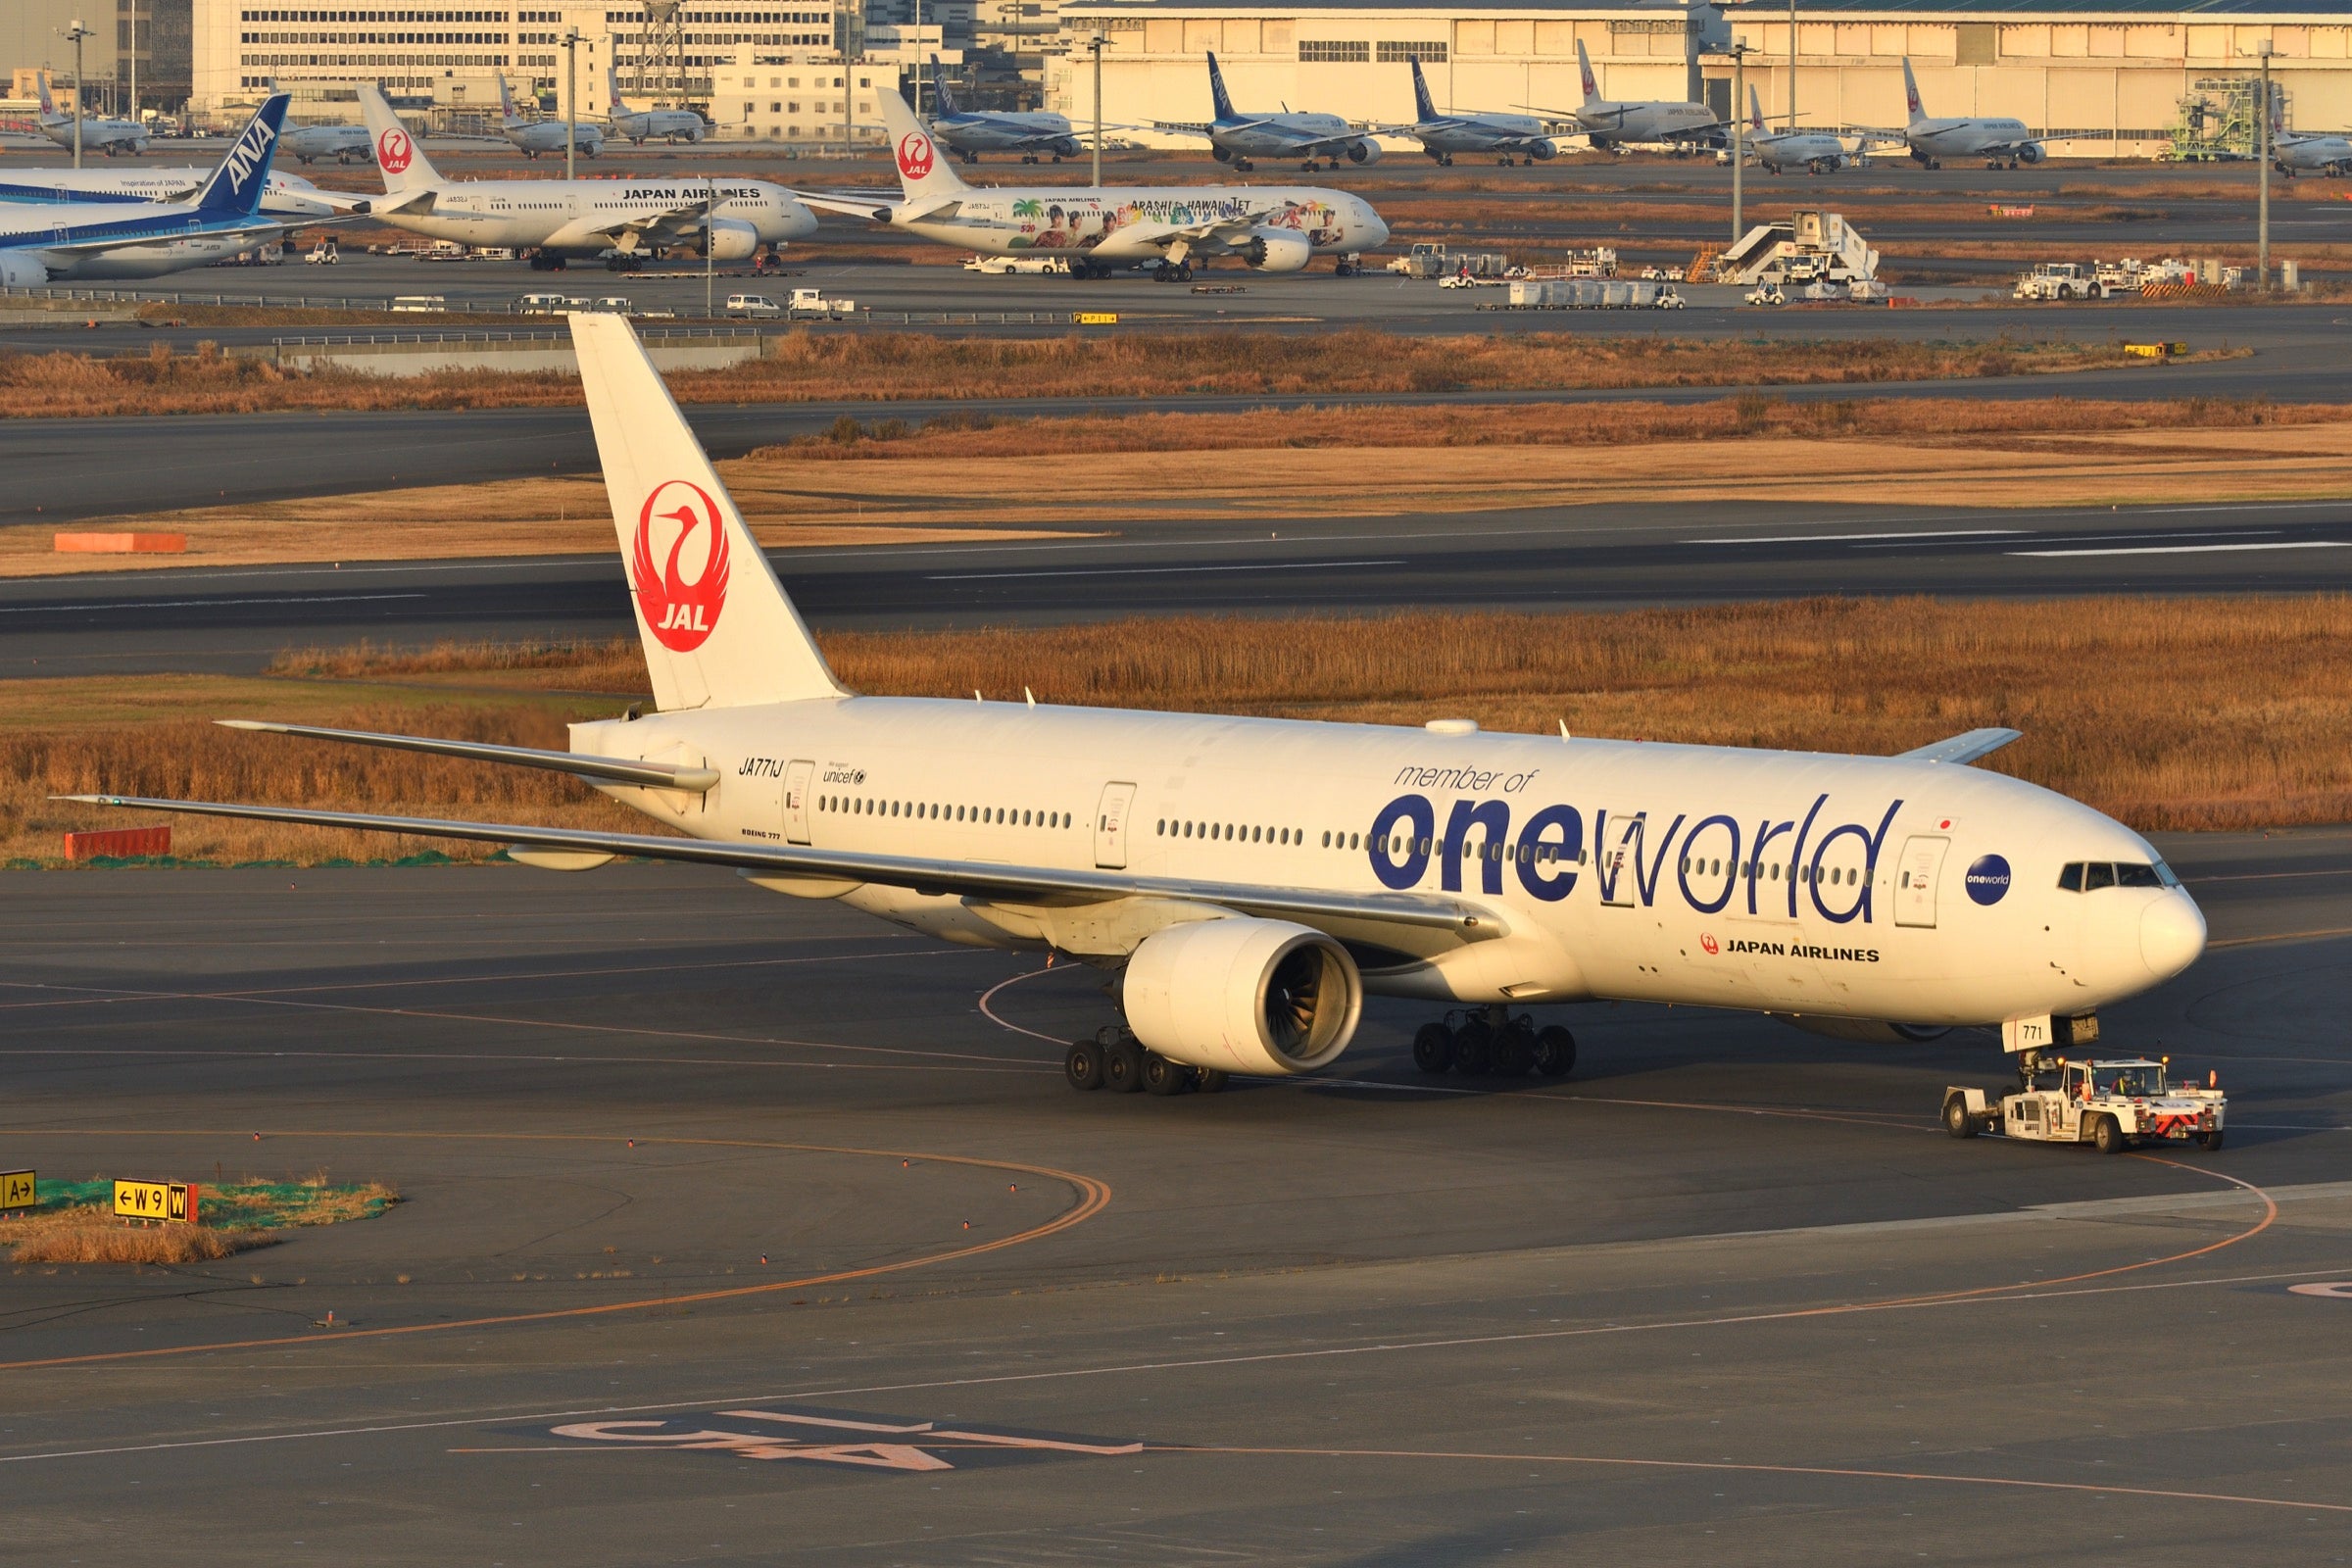 Japan Airlines plane in Oneworld alliance livery